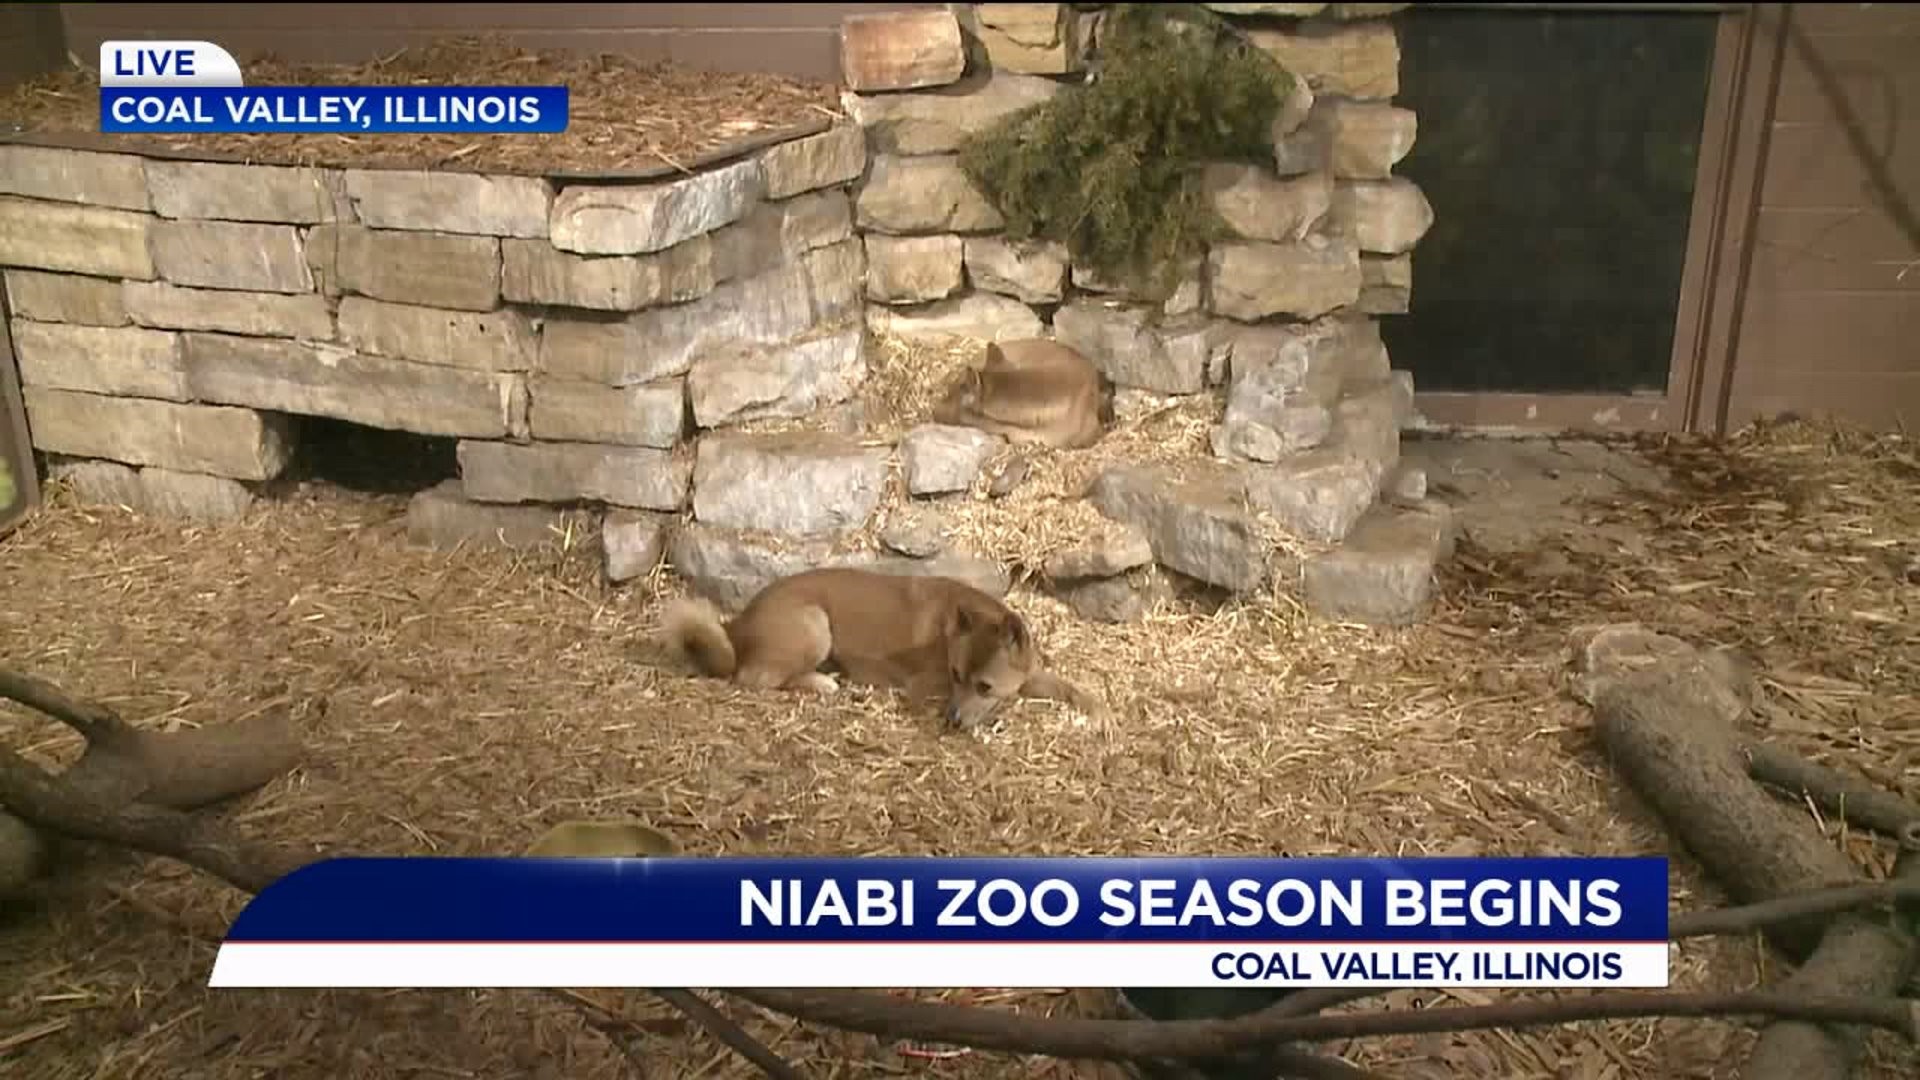 Niabi Zoo Shows Off New Singing Dogs Ahead of Opening Day